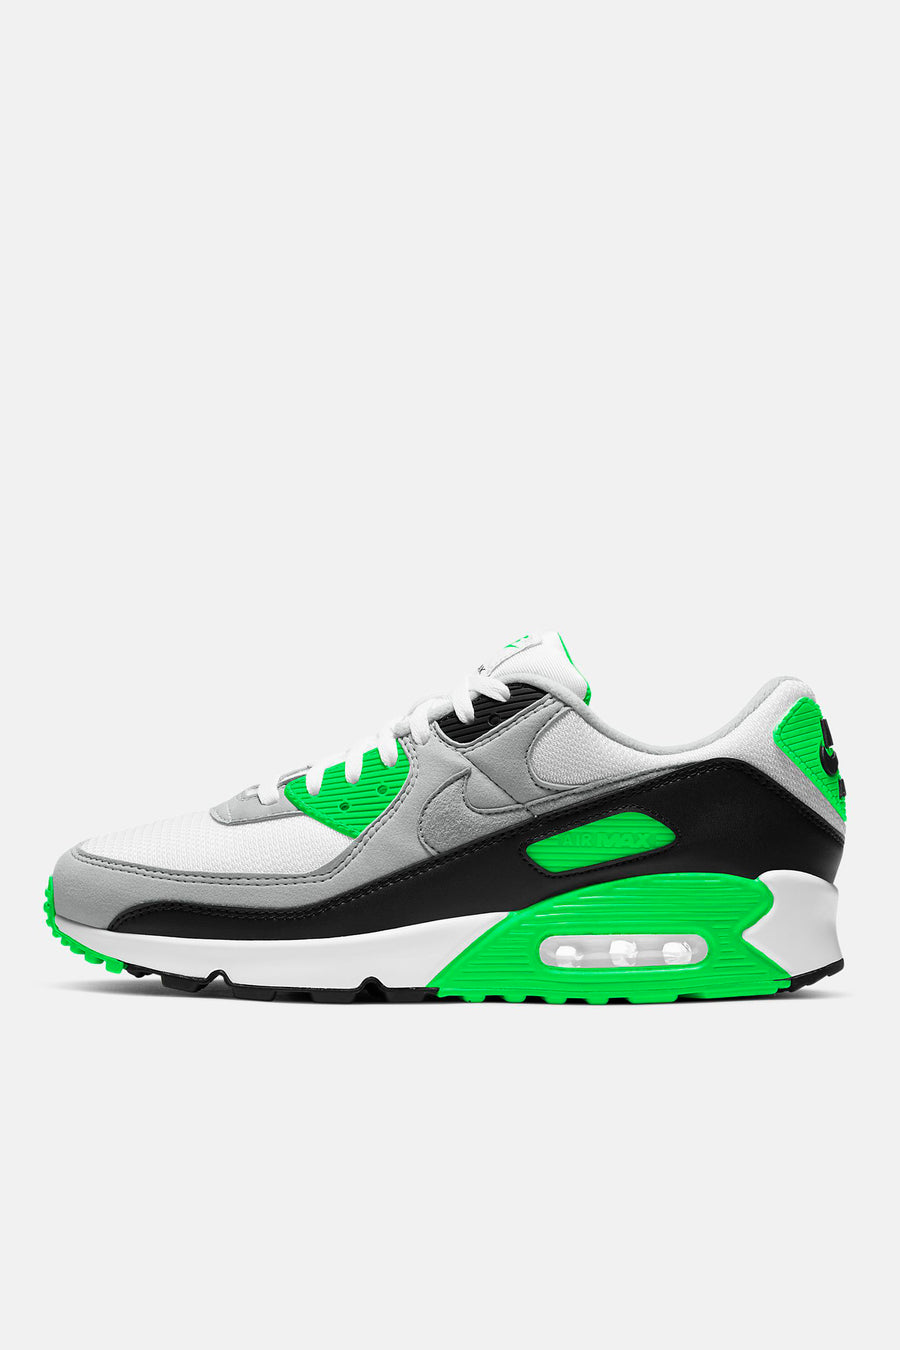 green and white air max 90